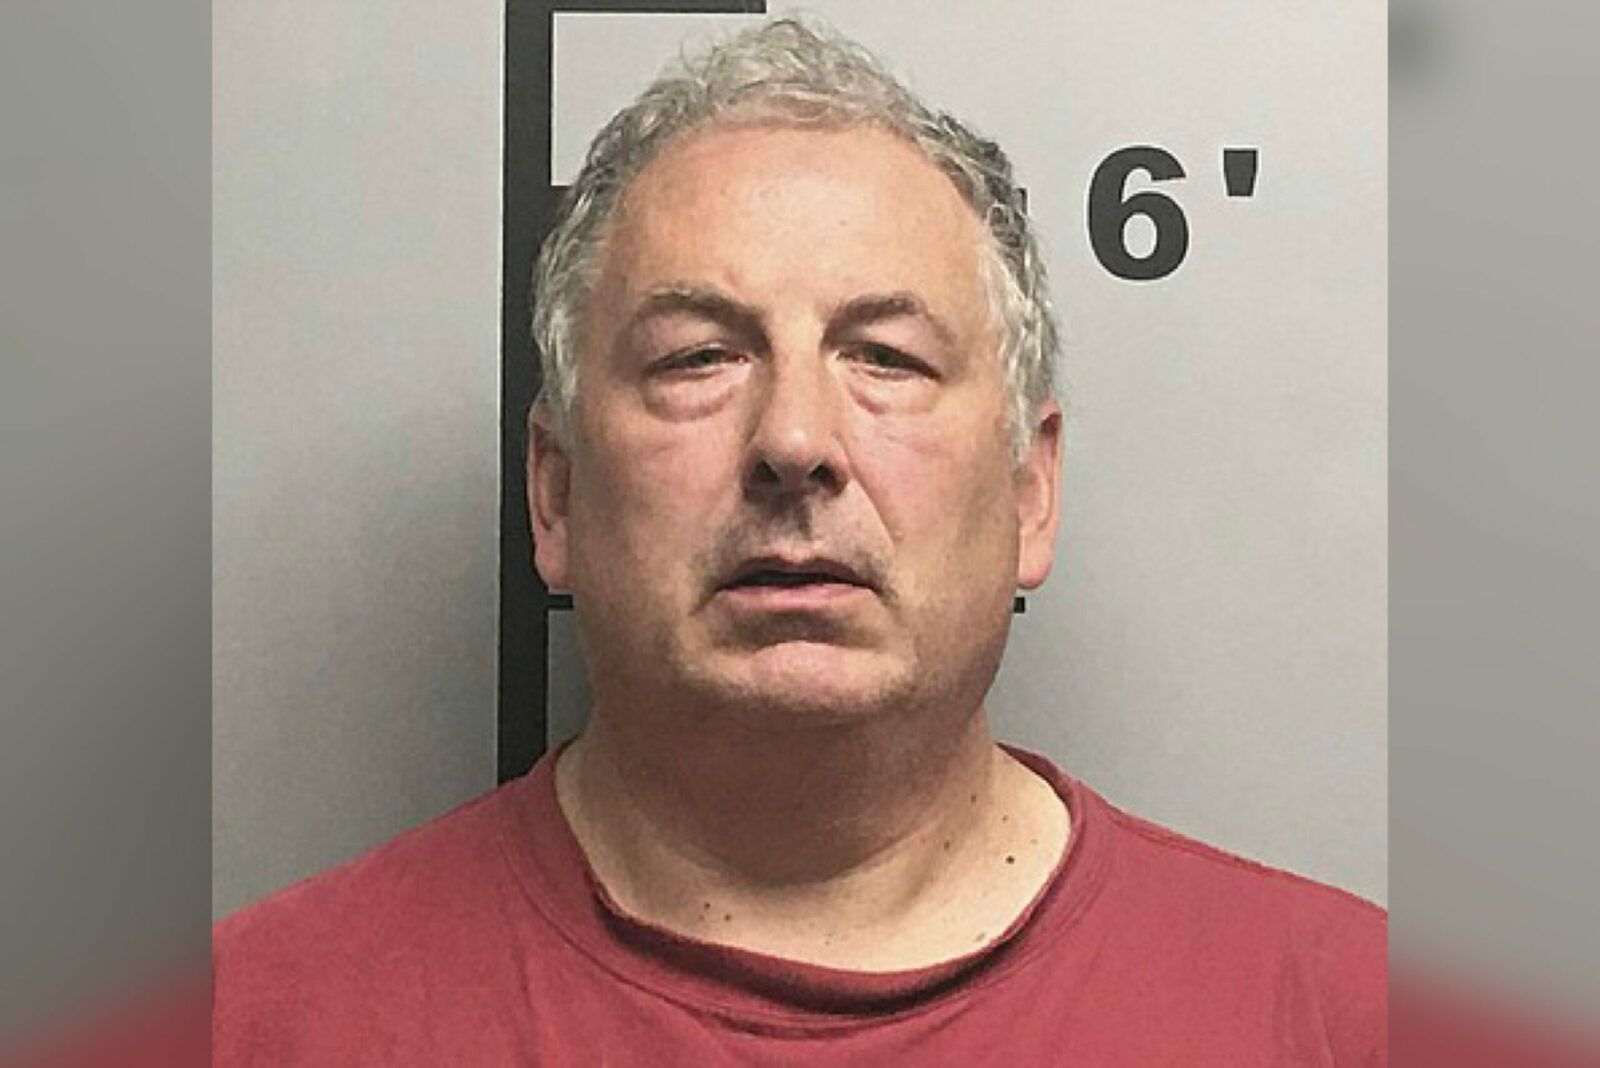 Arkansas Pastor And Founder Of Halfway House Accused Of Sexually Assaulting Resident